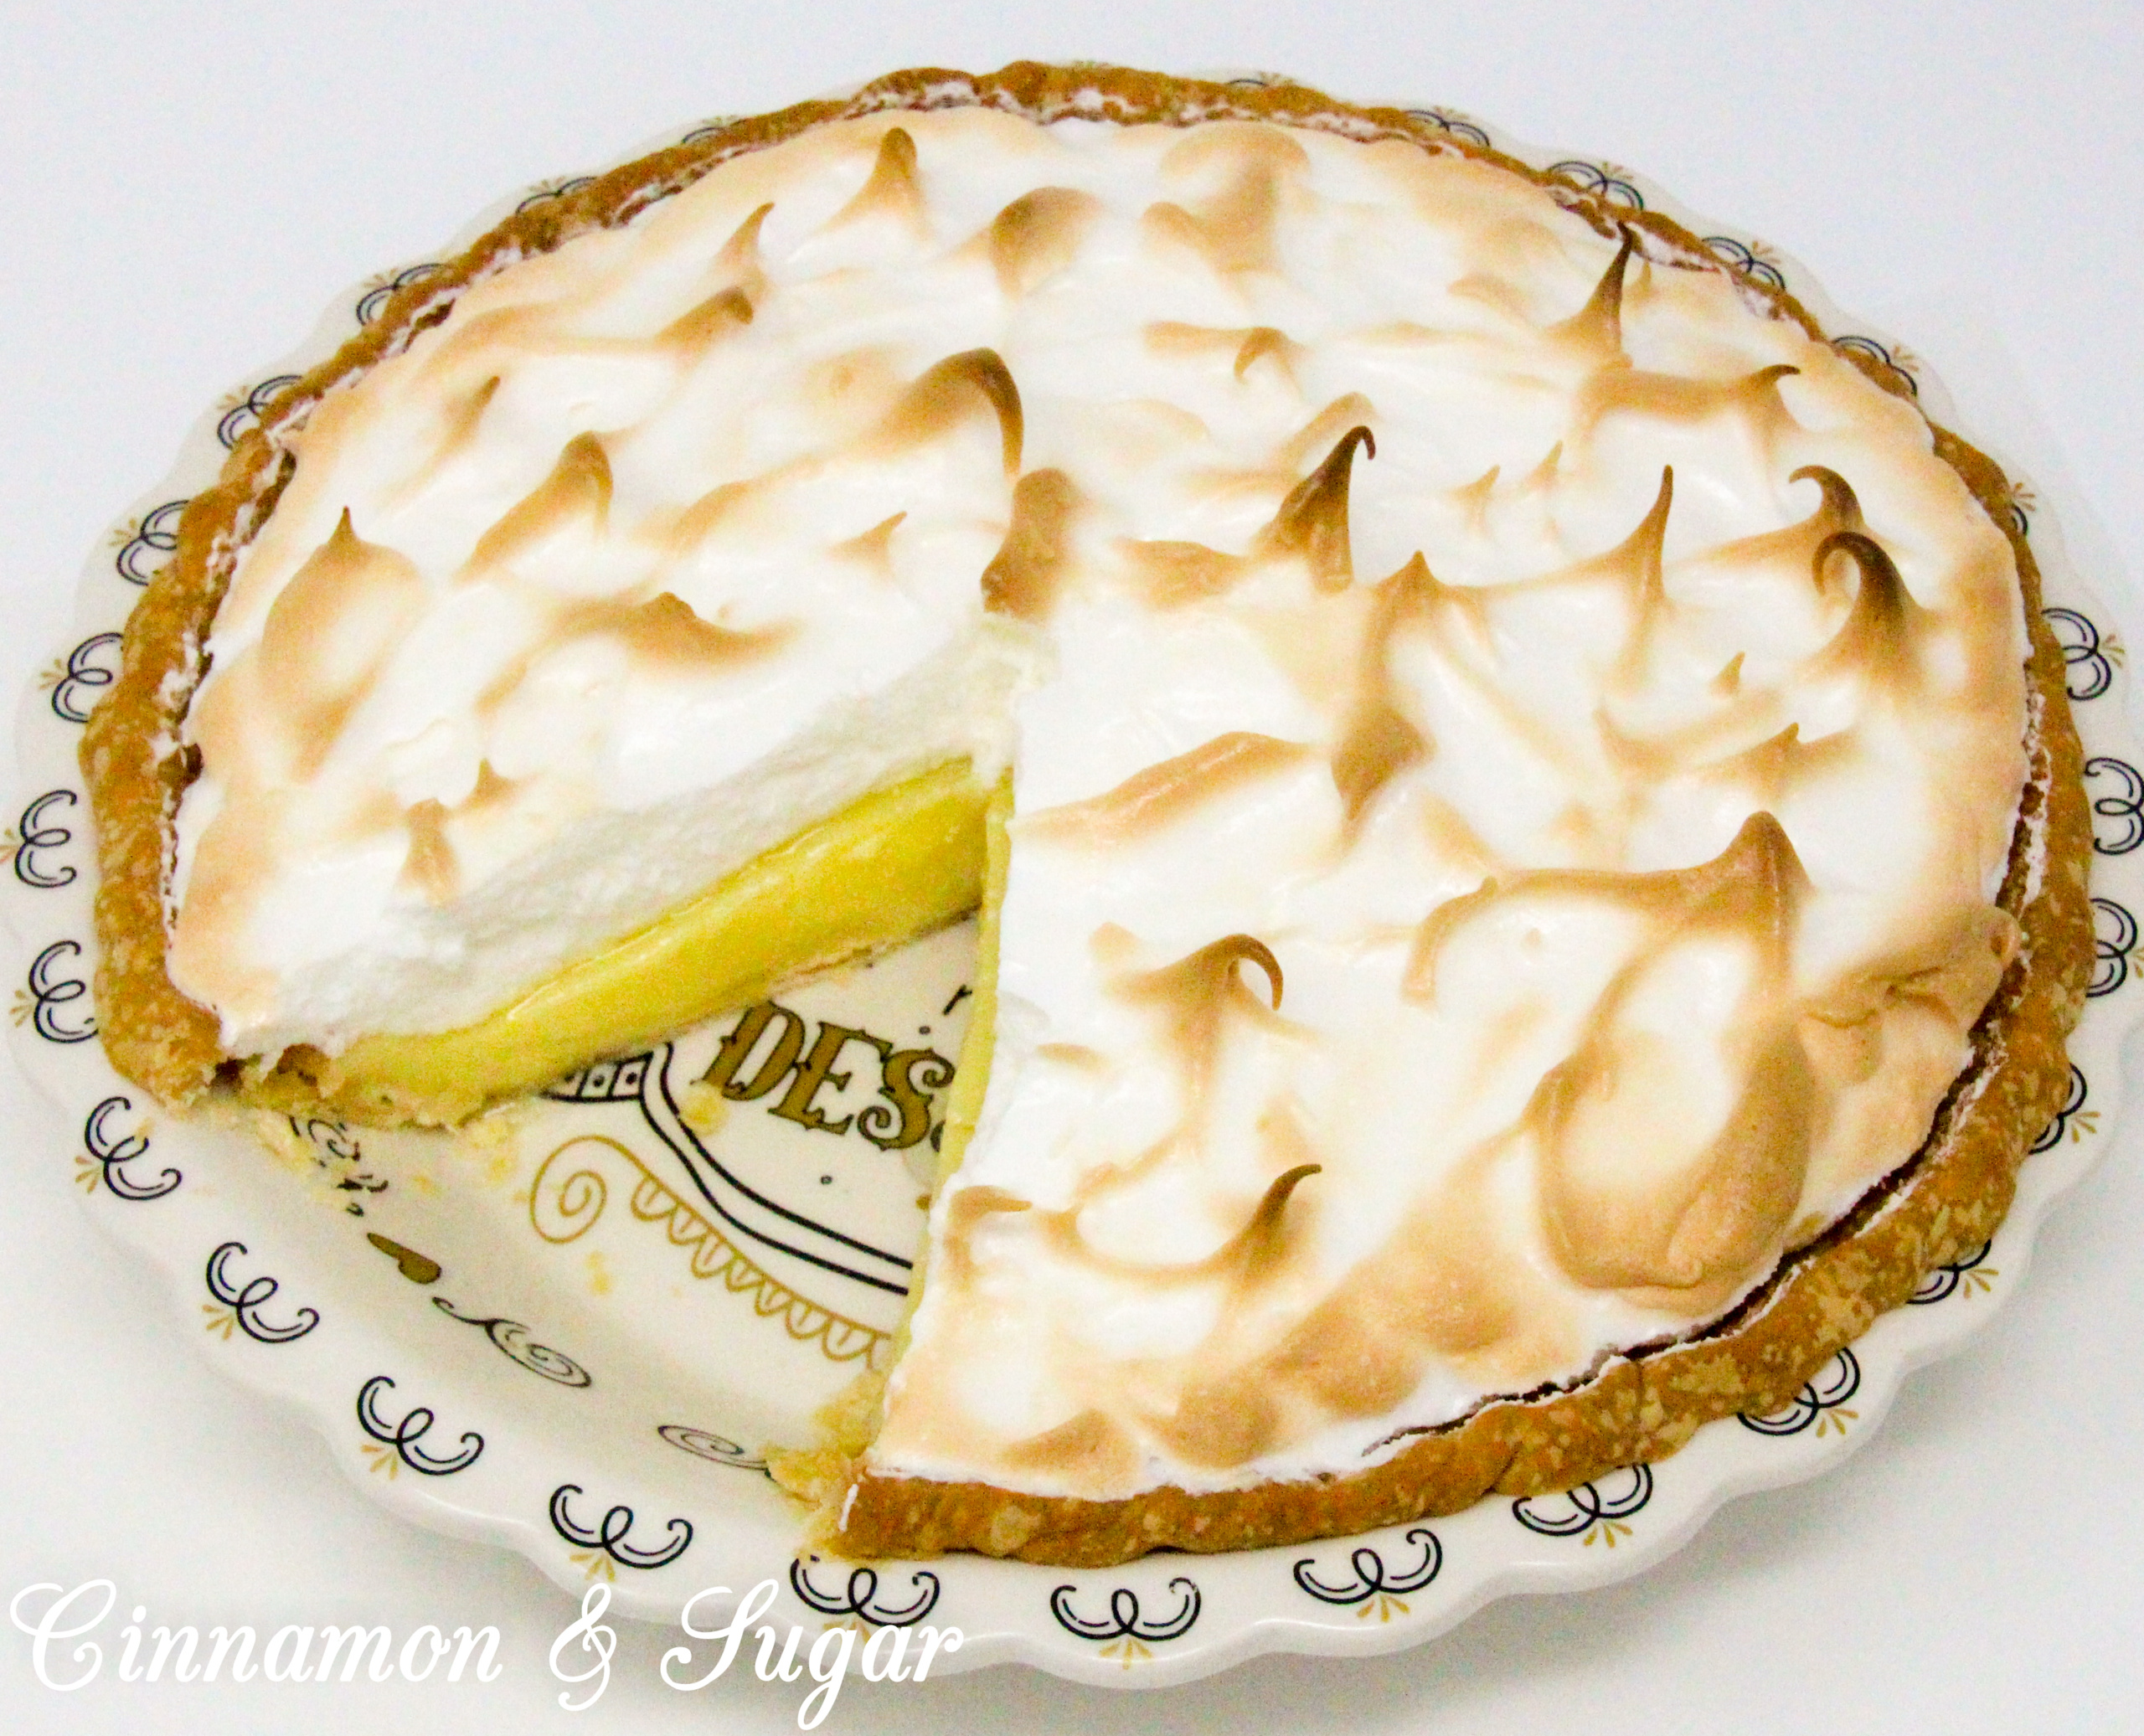 Lemony sweet-tart custard filling piled high with billowing cloud-like meringue, Susan Cutie's Lemon Meringue Pie is a refreshing dessert! Recipe shared with permission granted by Tina Kashian, author of MISTLETOE, MOUSSAKA, AND MURDER.